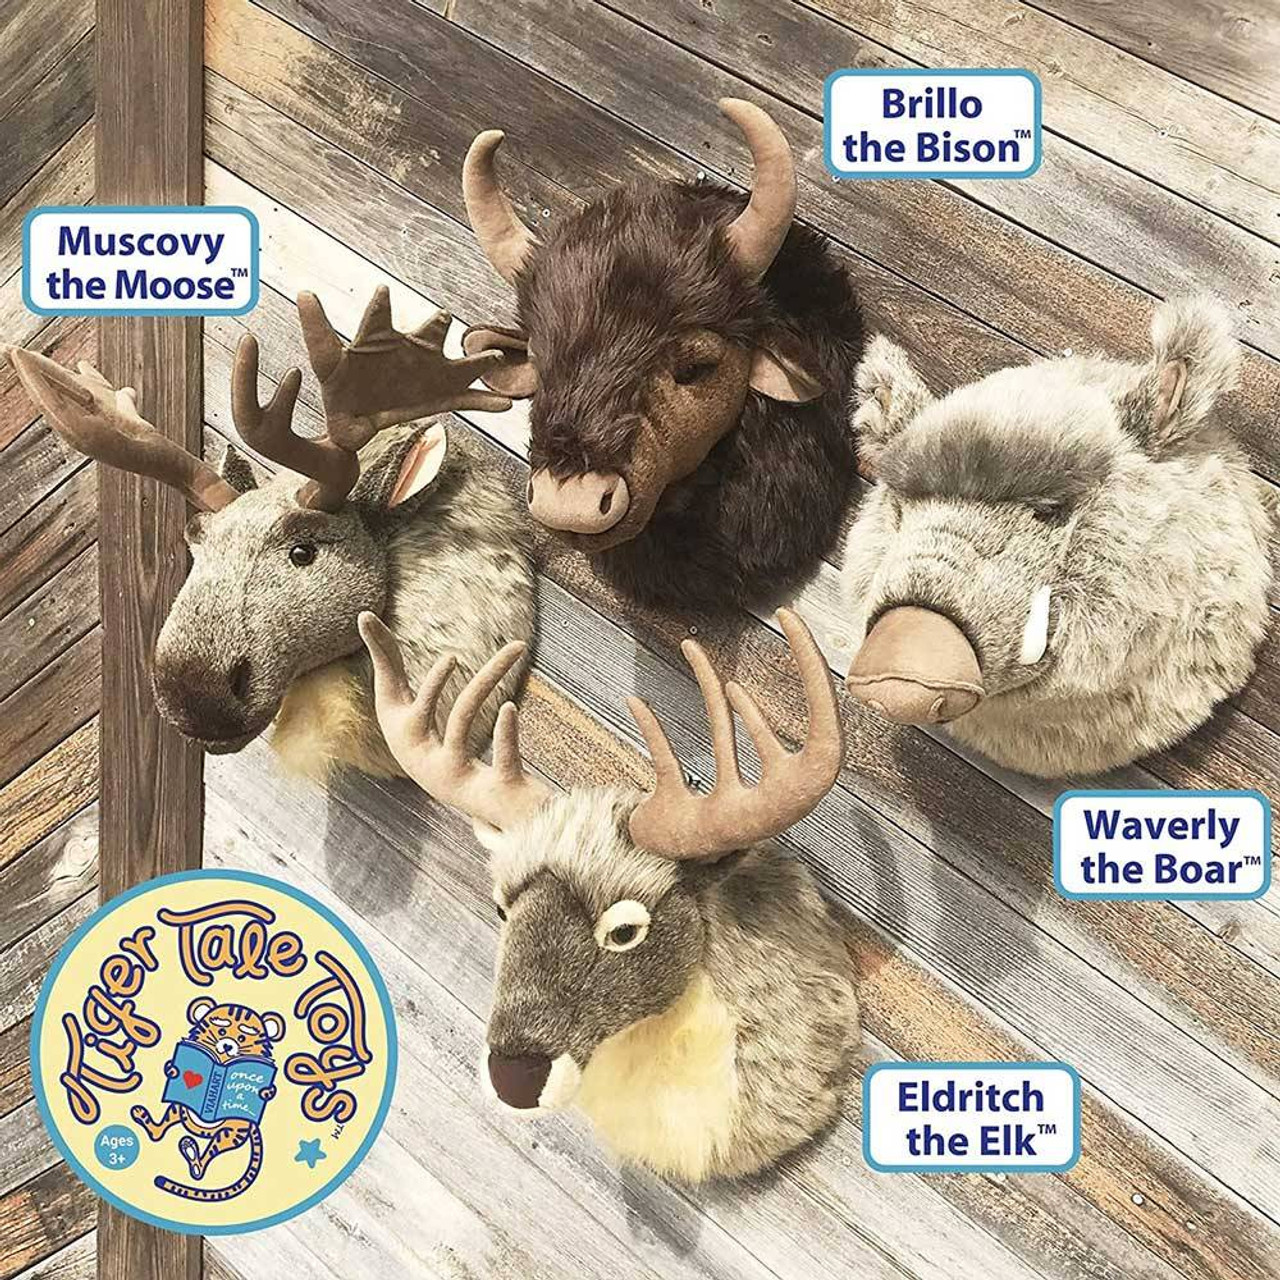 Viahart Tiger Tale Toys Eldritch The Elk 24 Inch Stag (with Antlers) Stuffed Animal Plush Deer Head Wall Mount Buck Bus | Unitedpetworld.Com